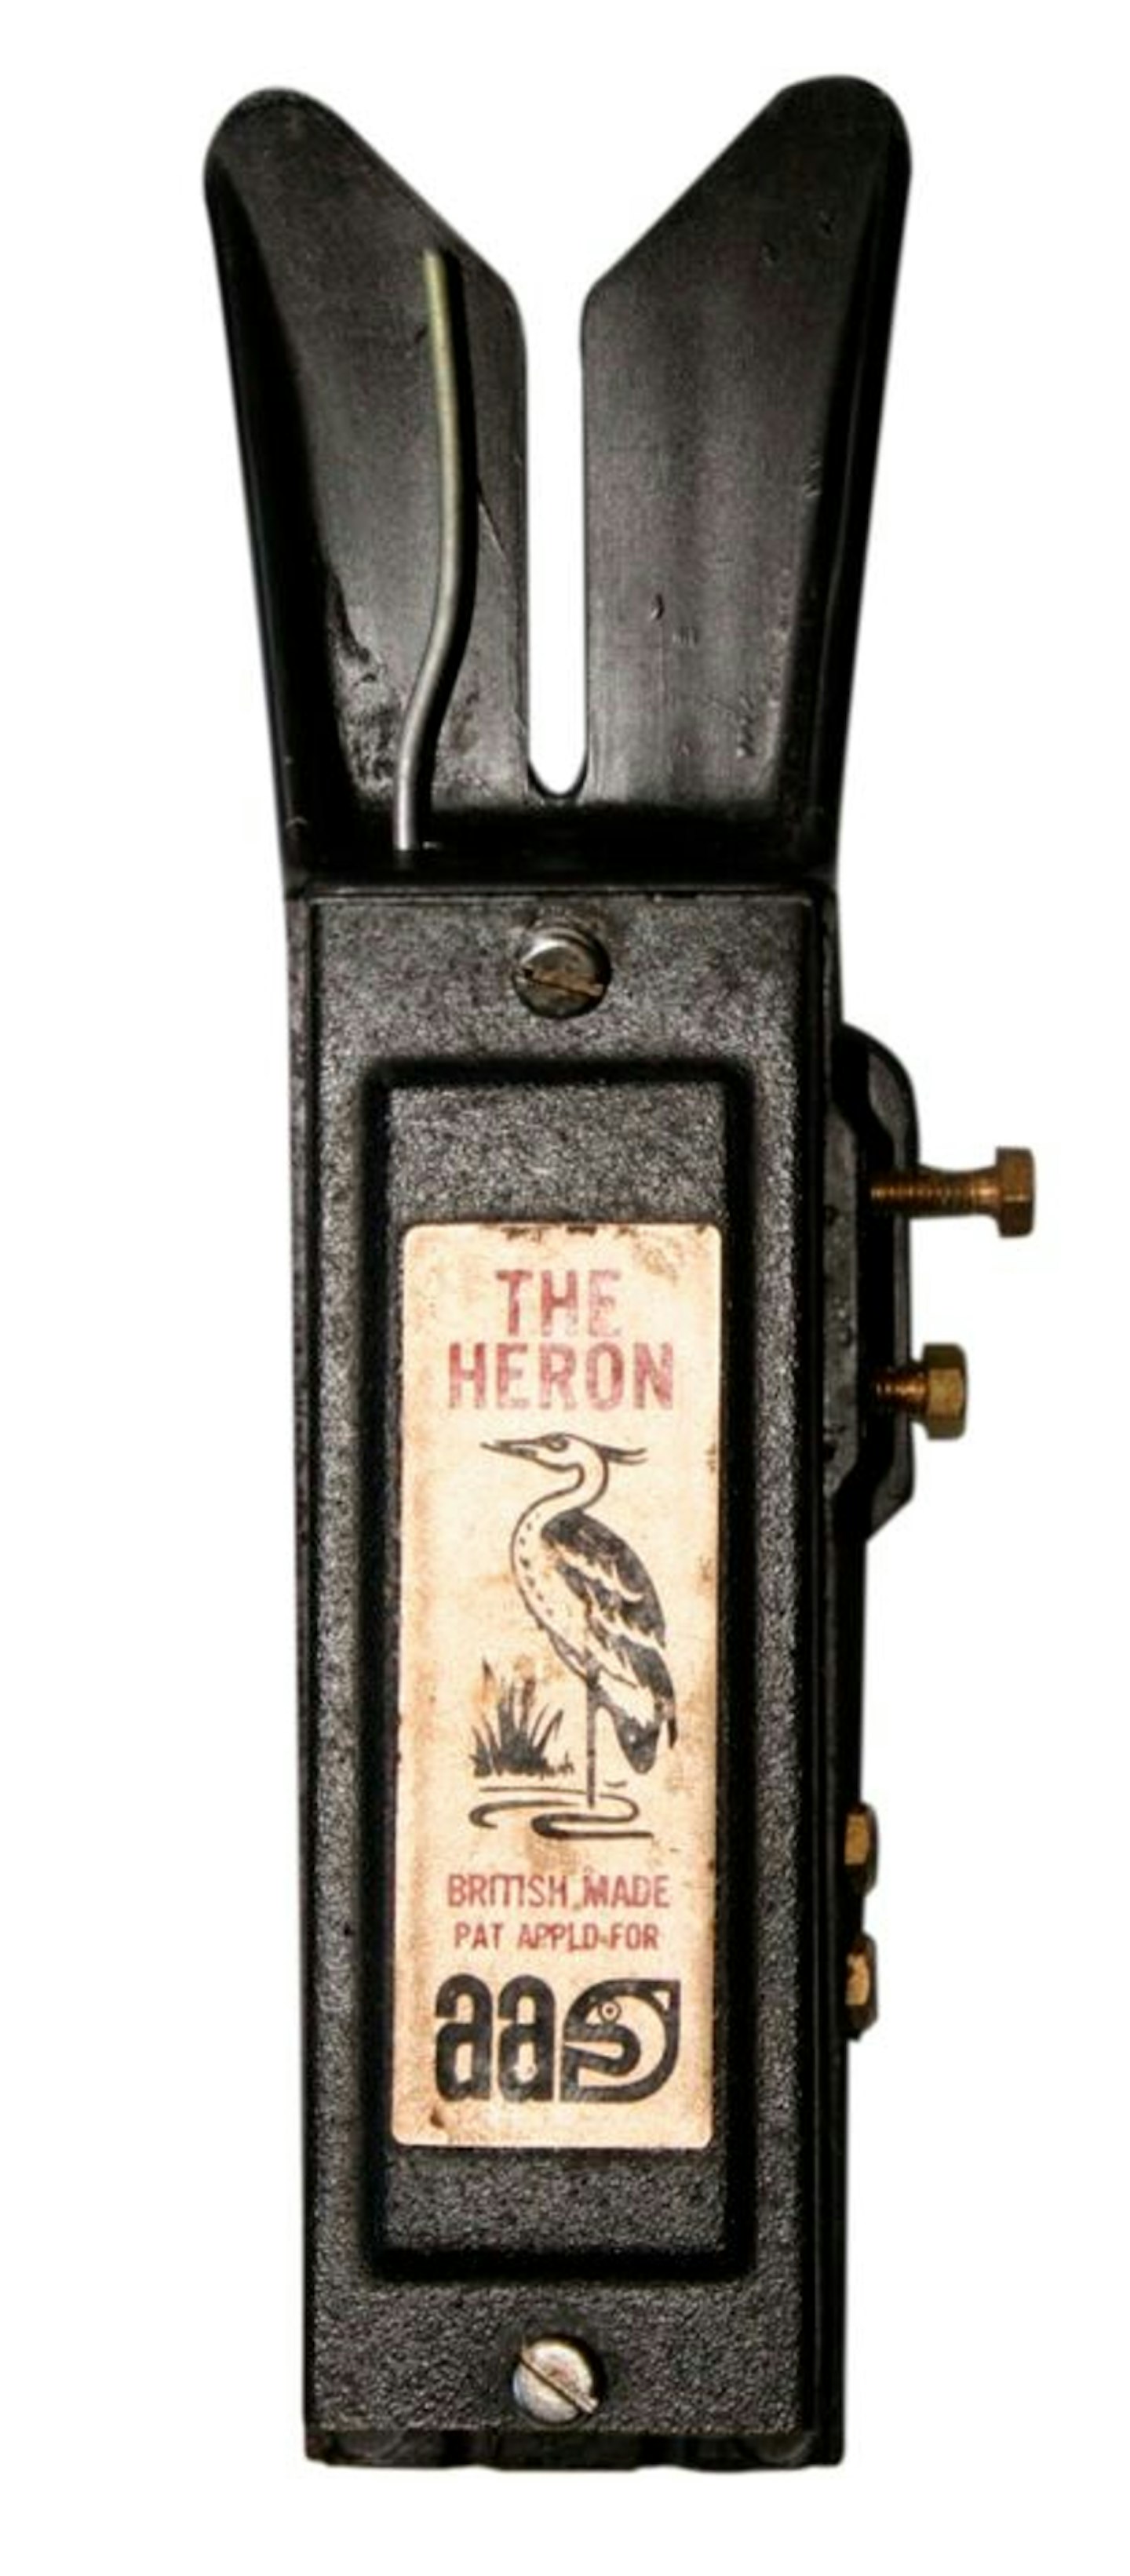 Heron bite alarms are now a cult item